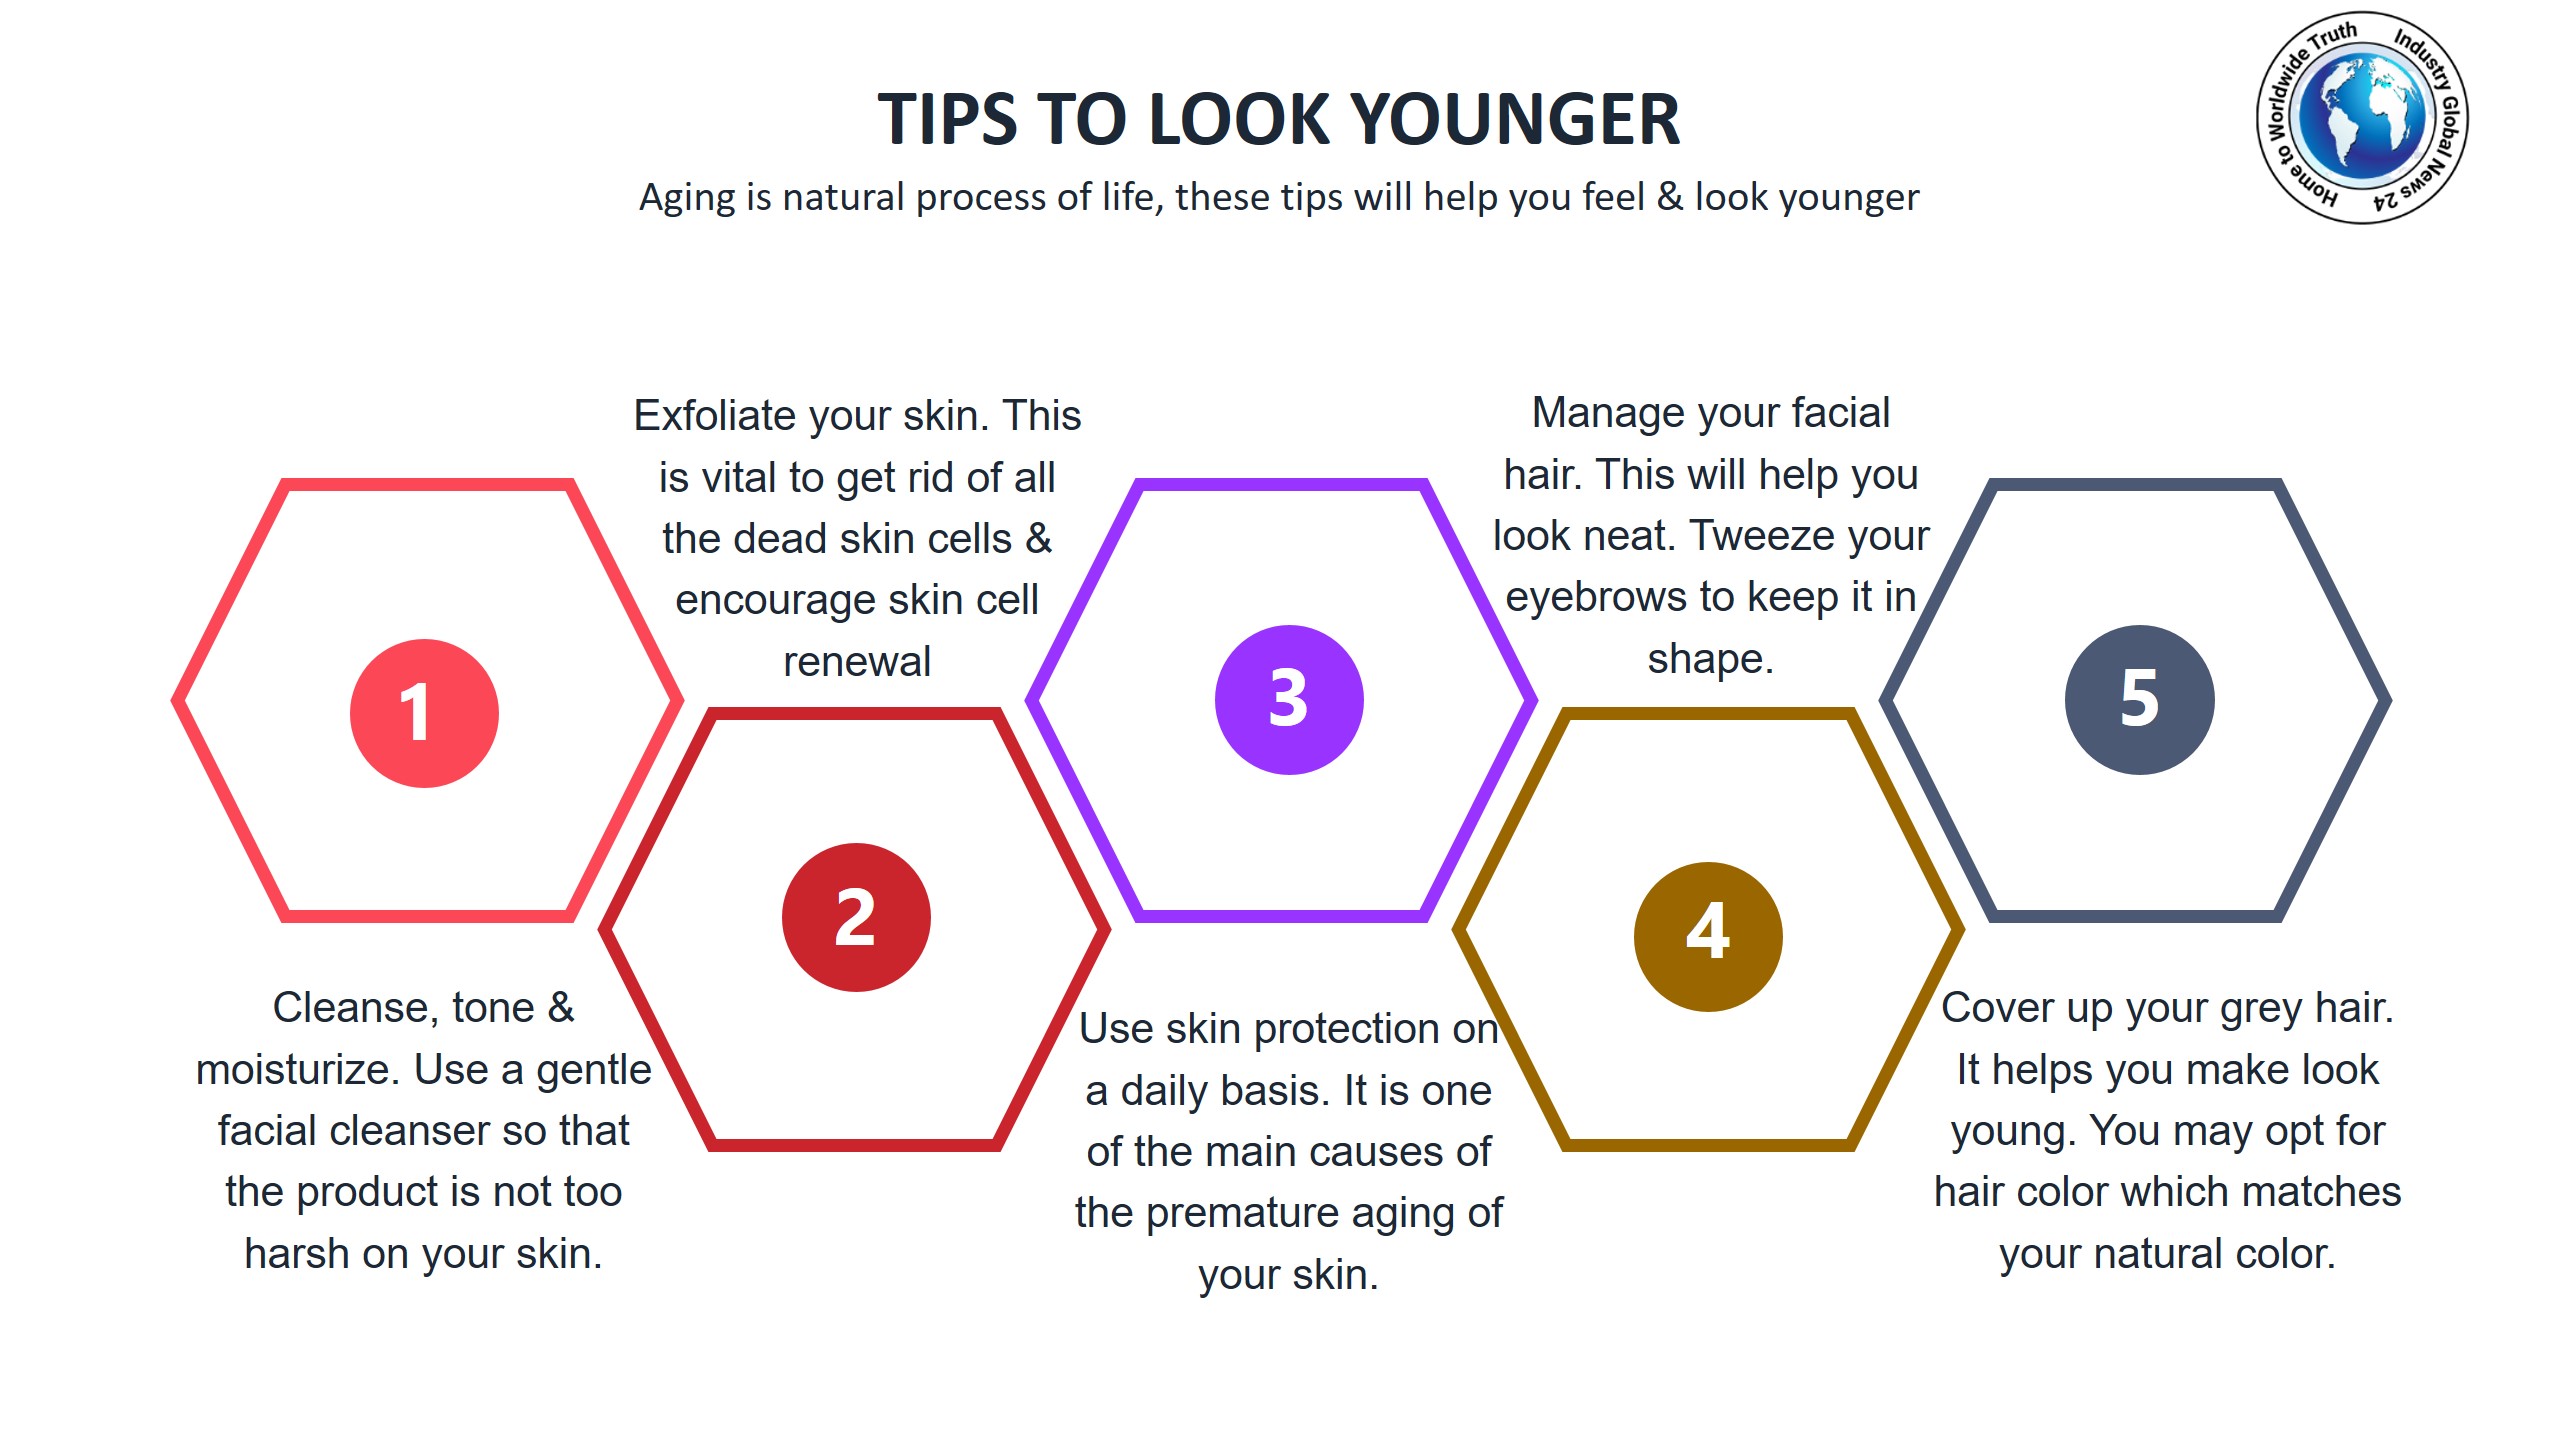 Tips to look younger